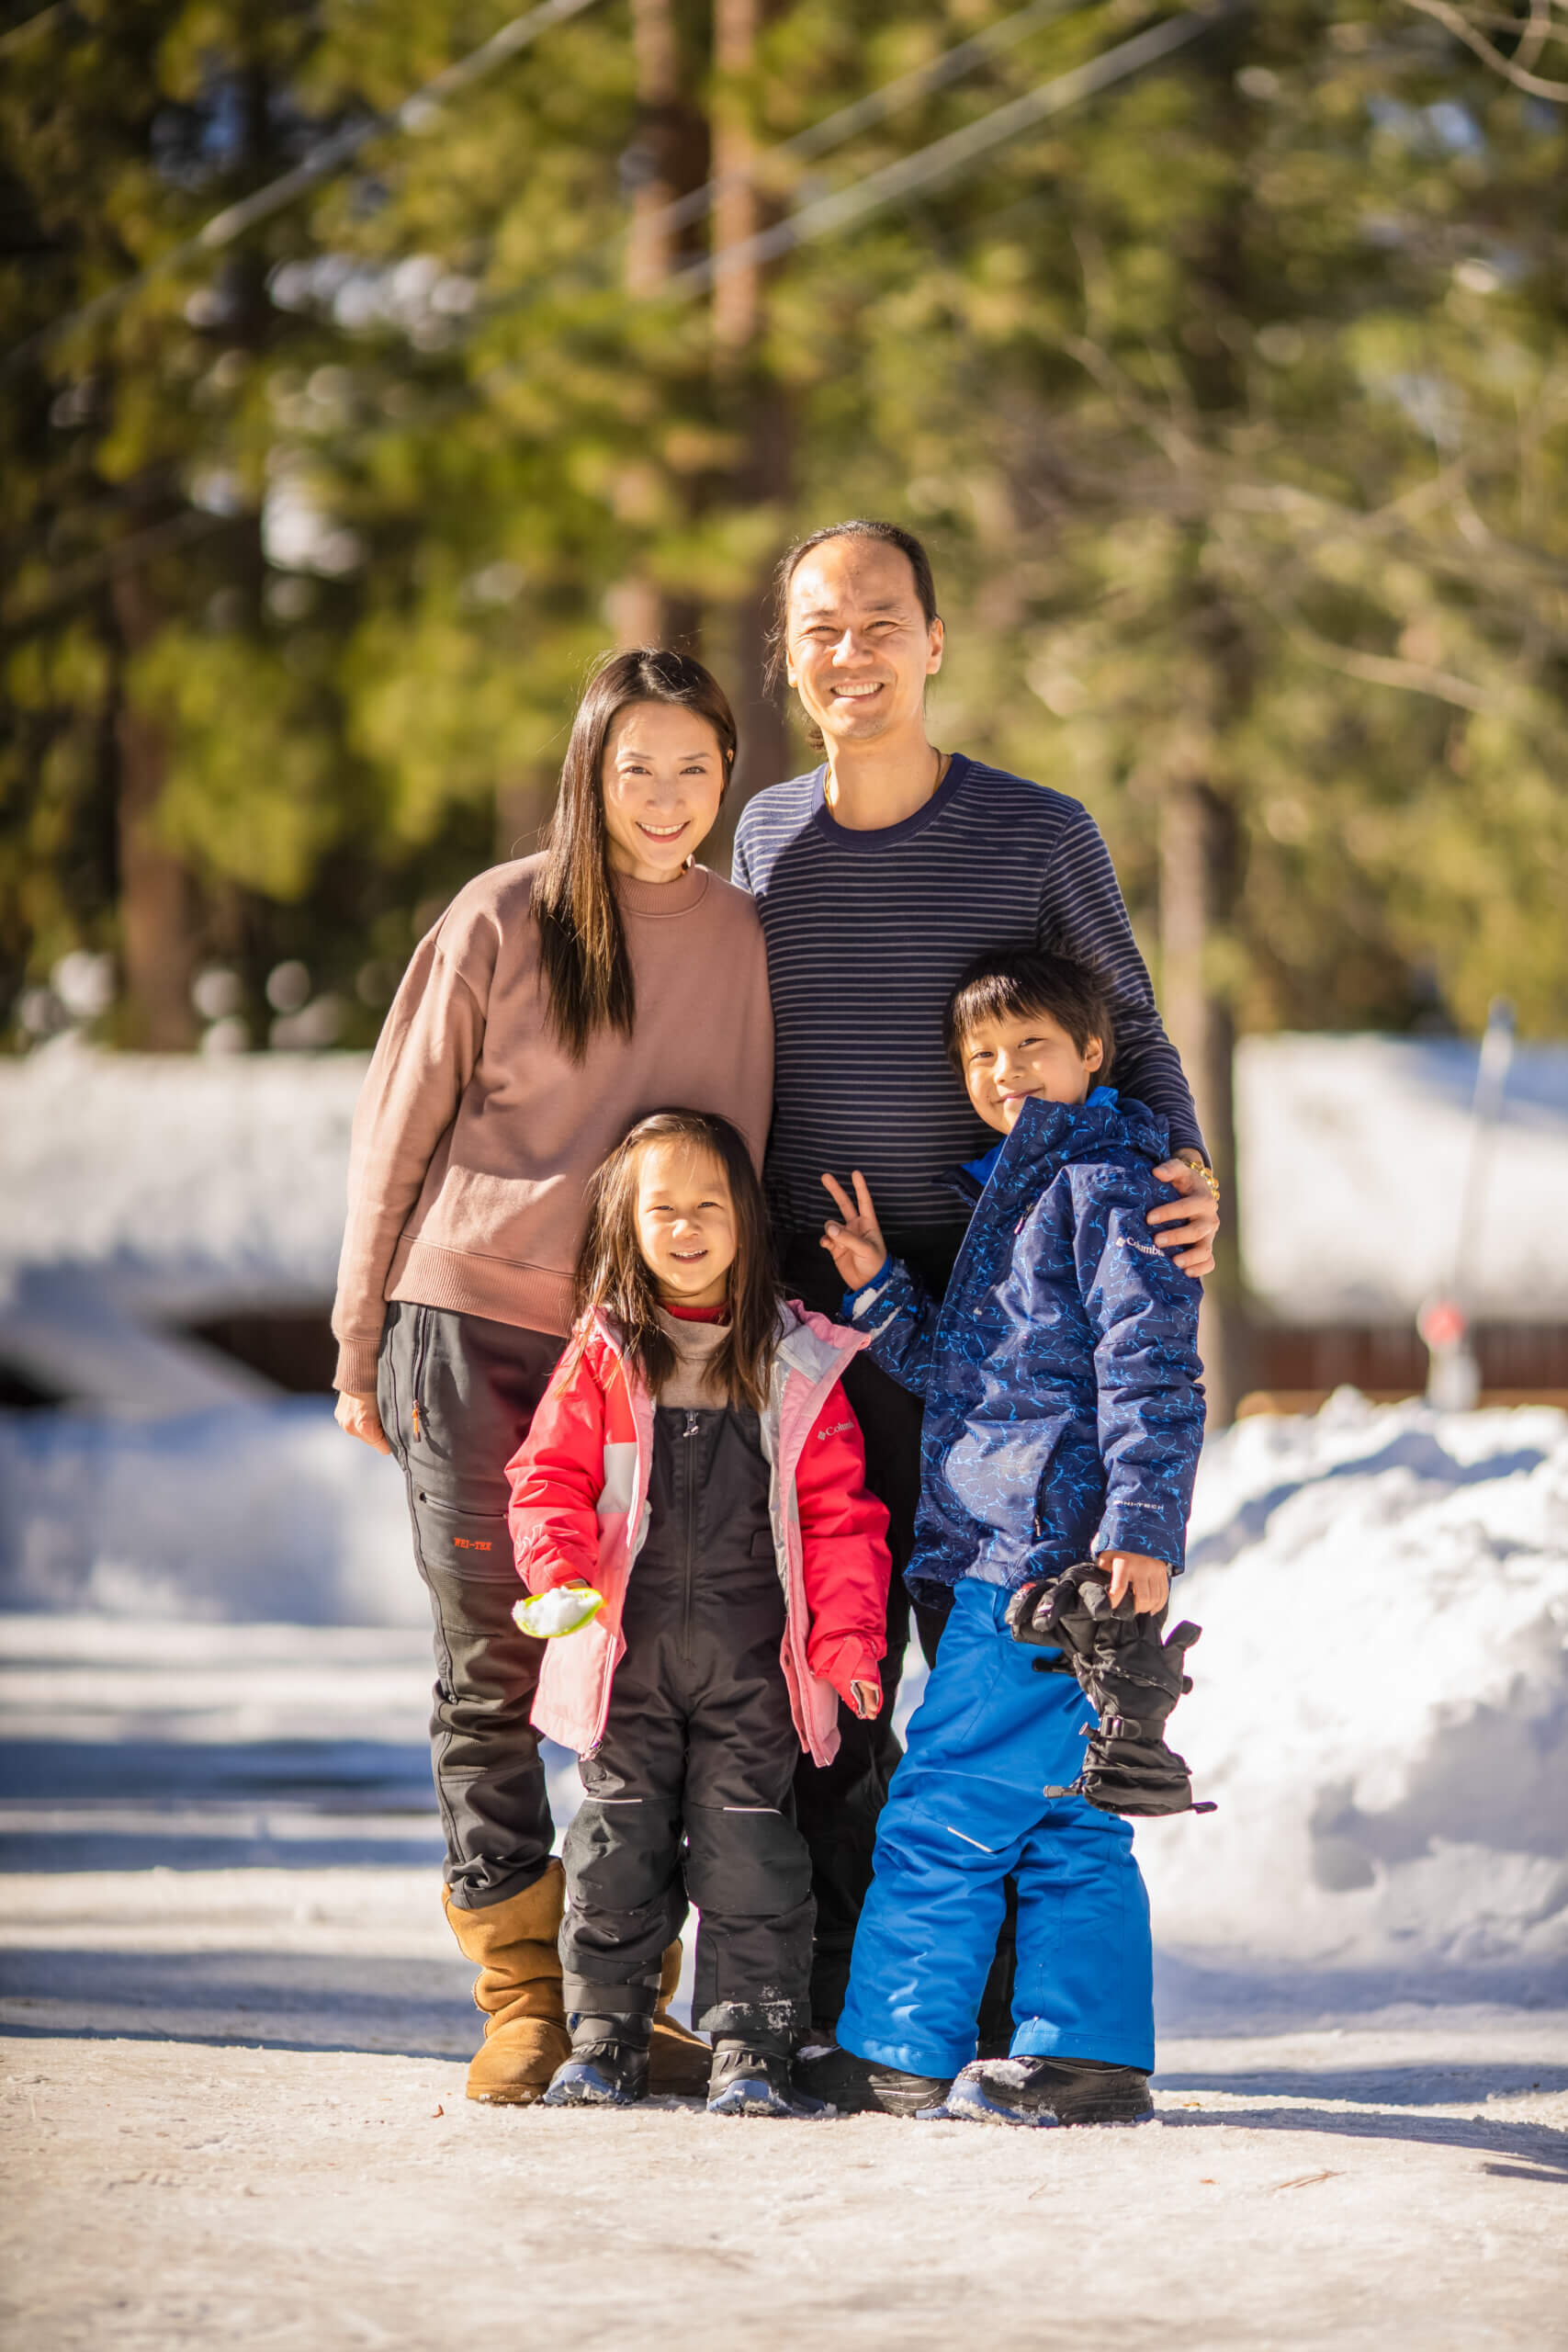 Benjamin Yeh standing outside in the snow with his family: wife and two children